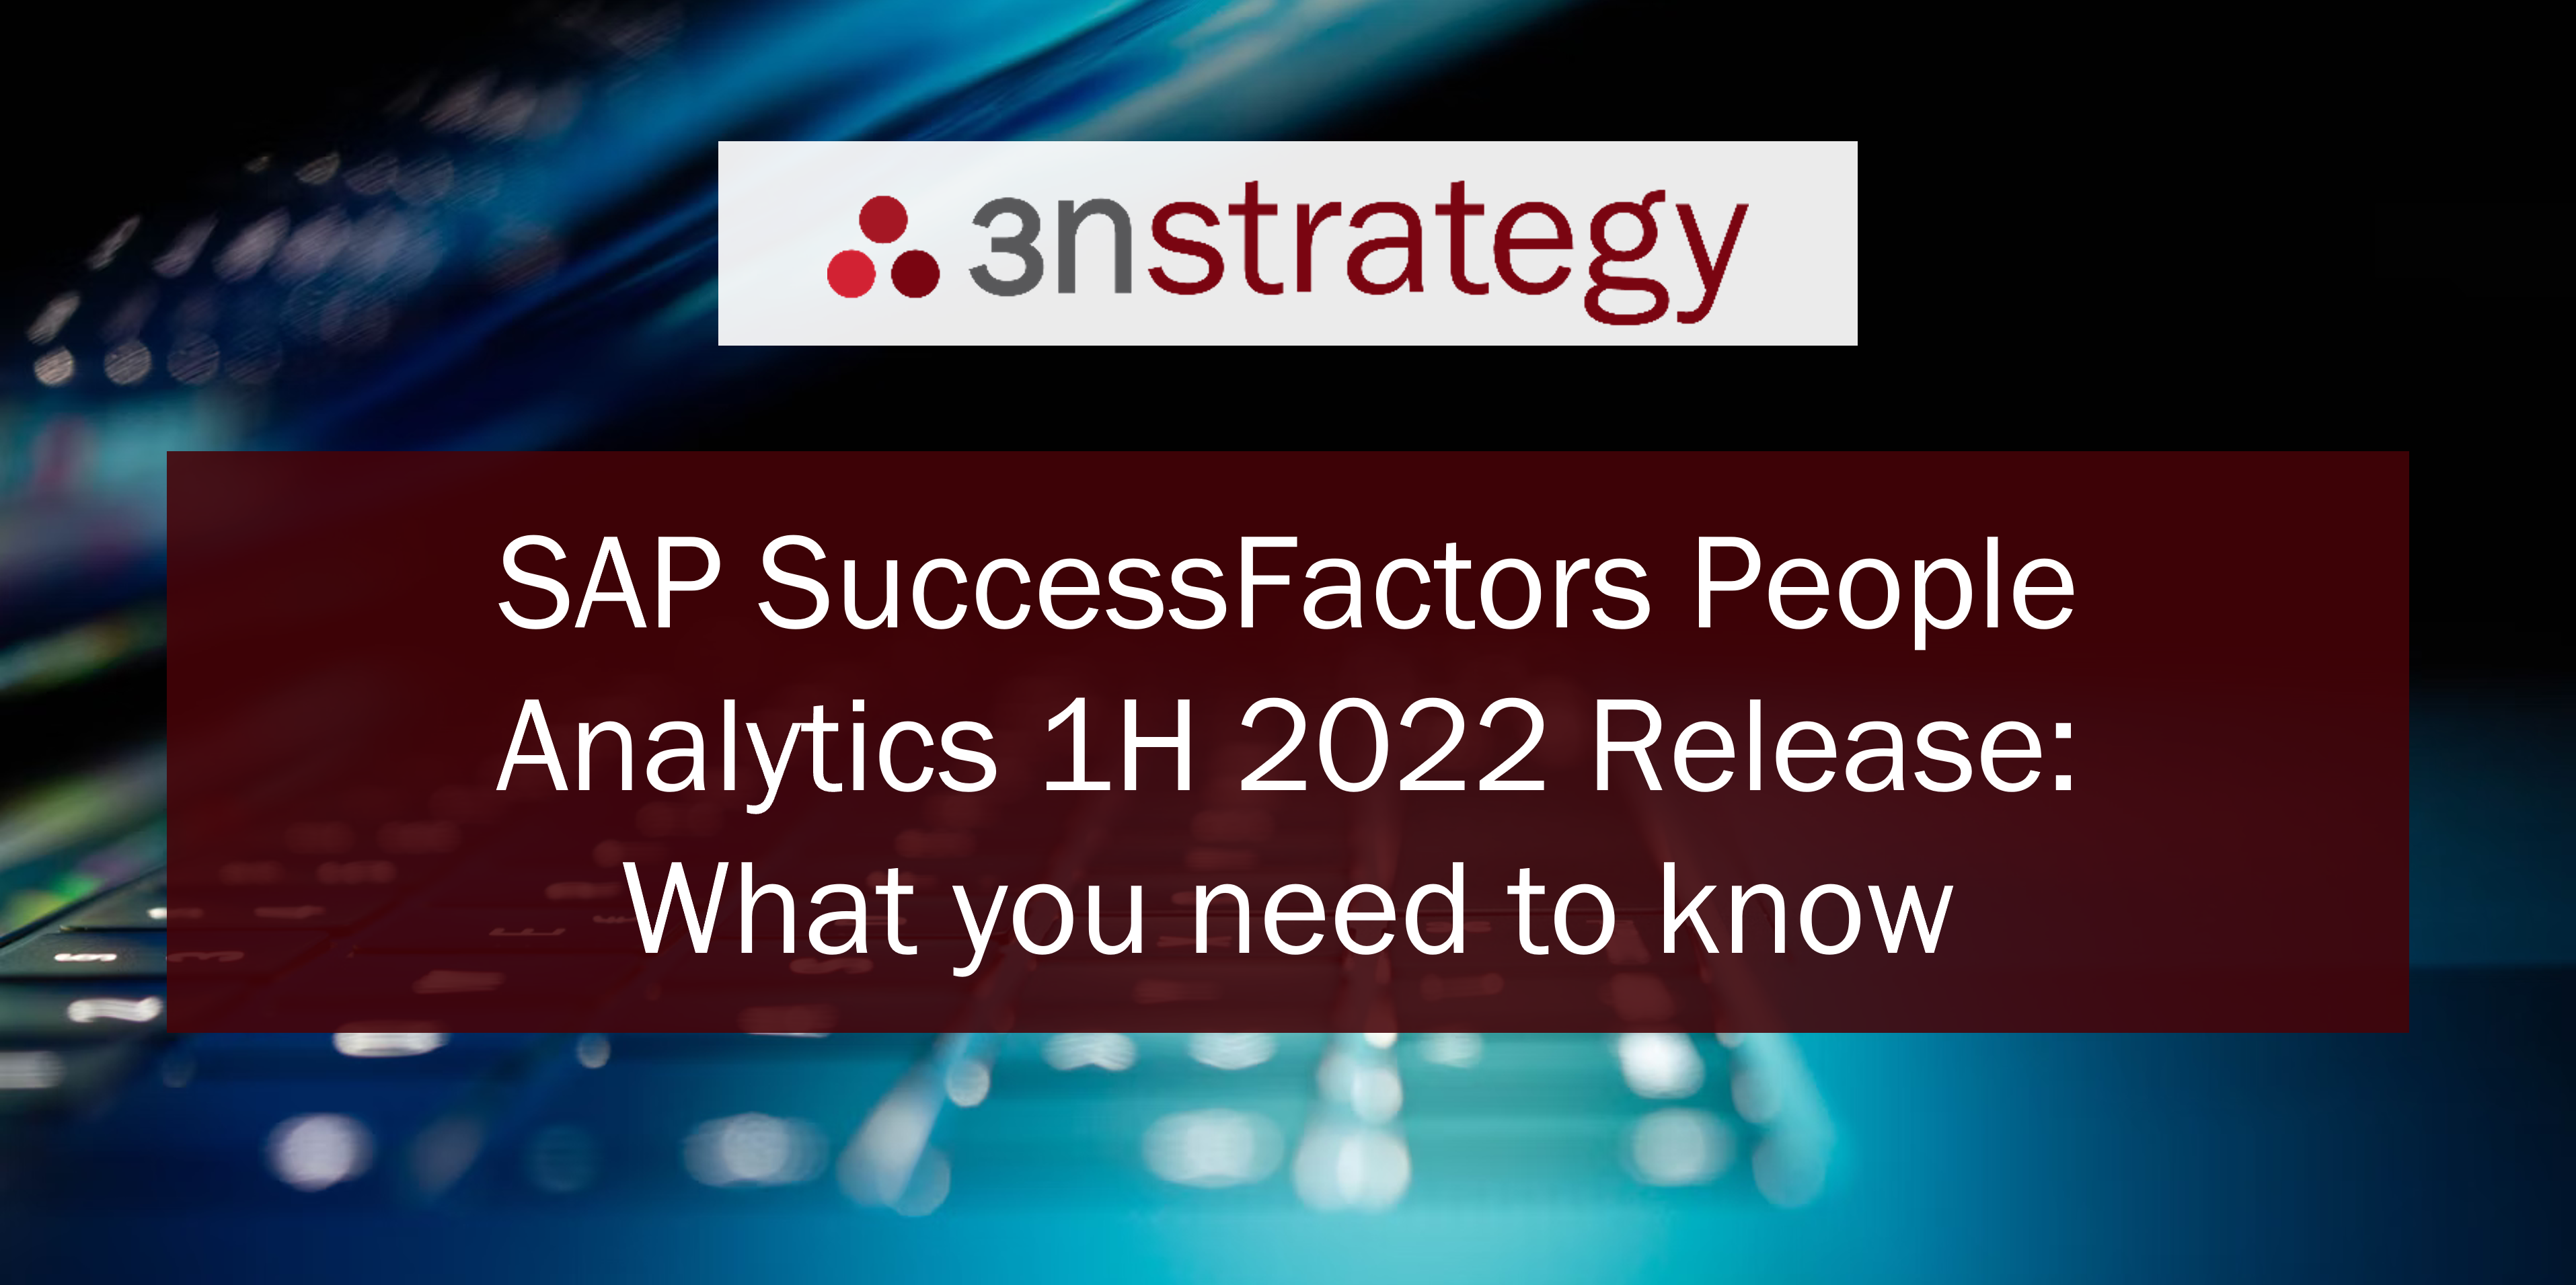 SuccessFactors People Analytics 1H 2022 Release: What you need to know